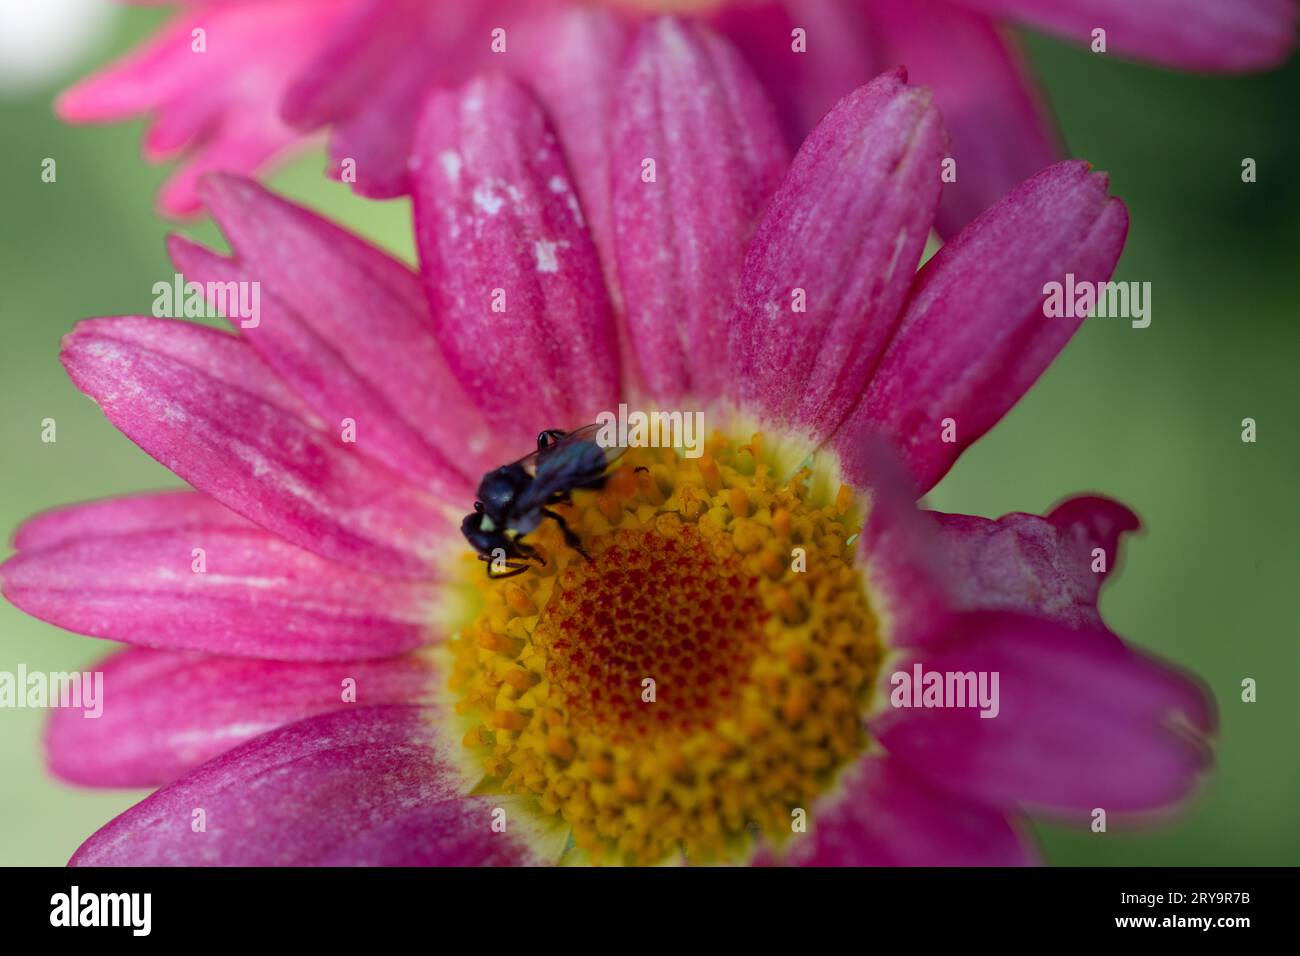 Native bee on pink daisy flower Stock Photo